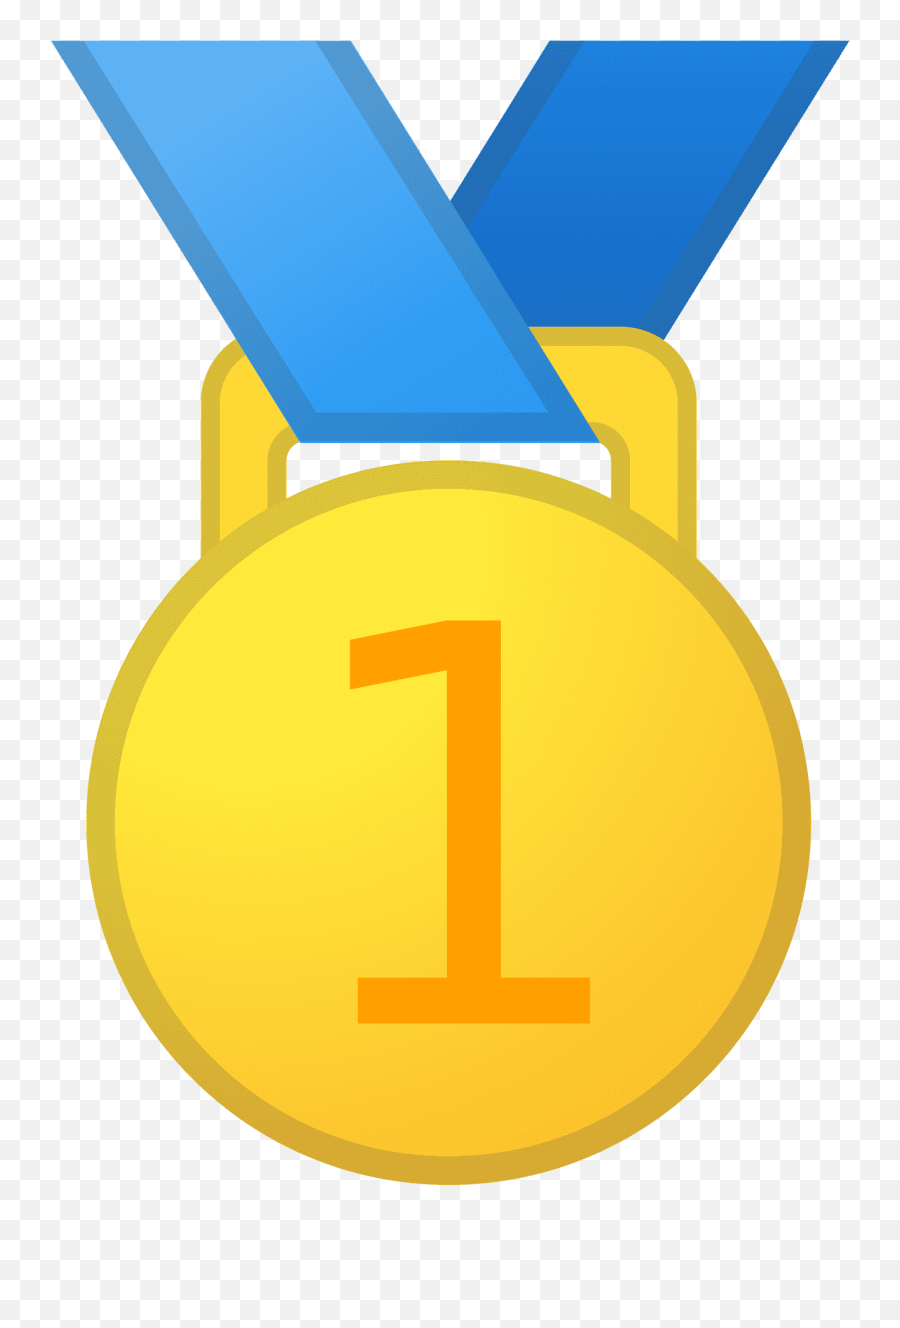 1st Place Medal Icon Noto Emoji Activities Iconset Google,Yikes Emoji Outlook